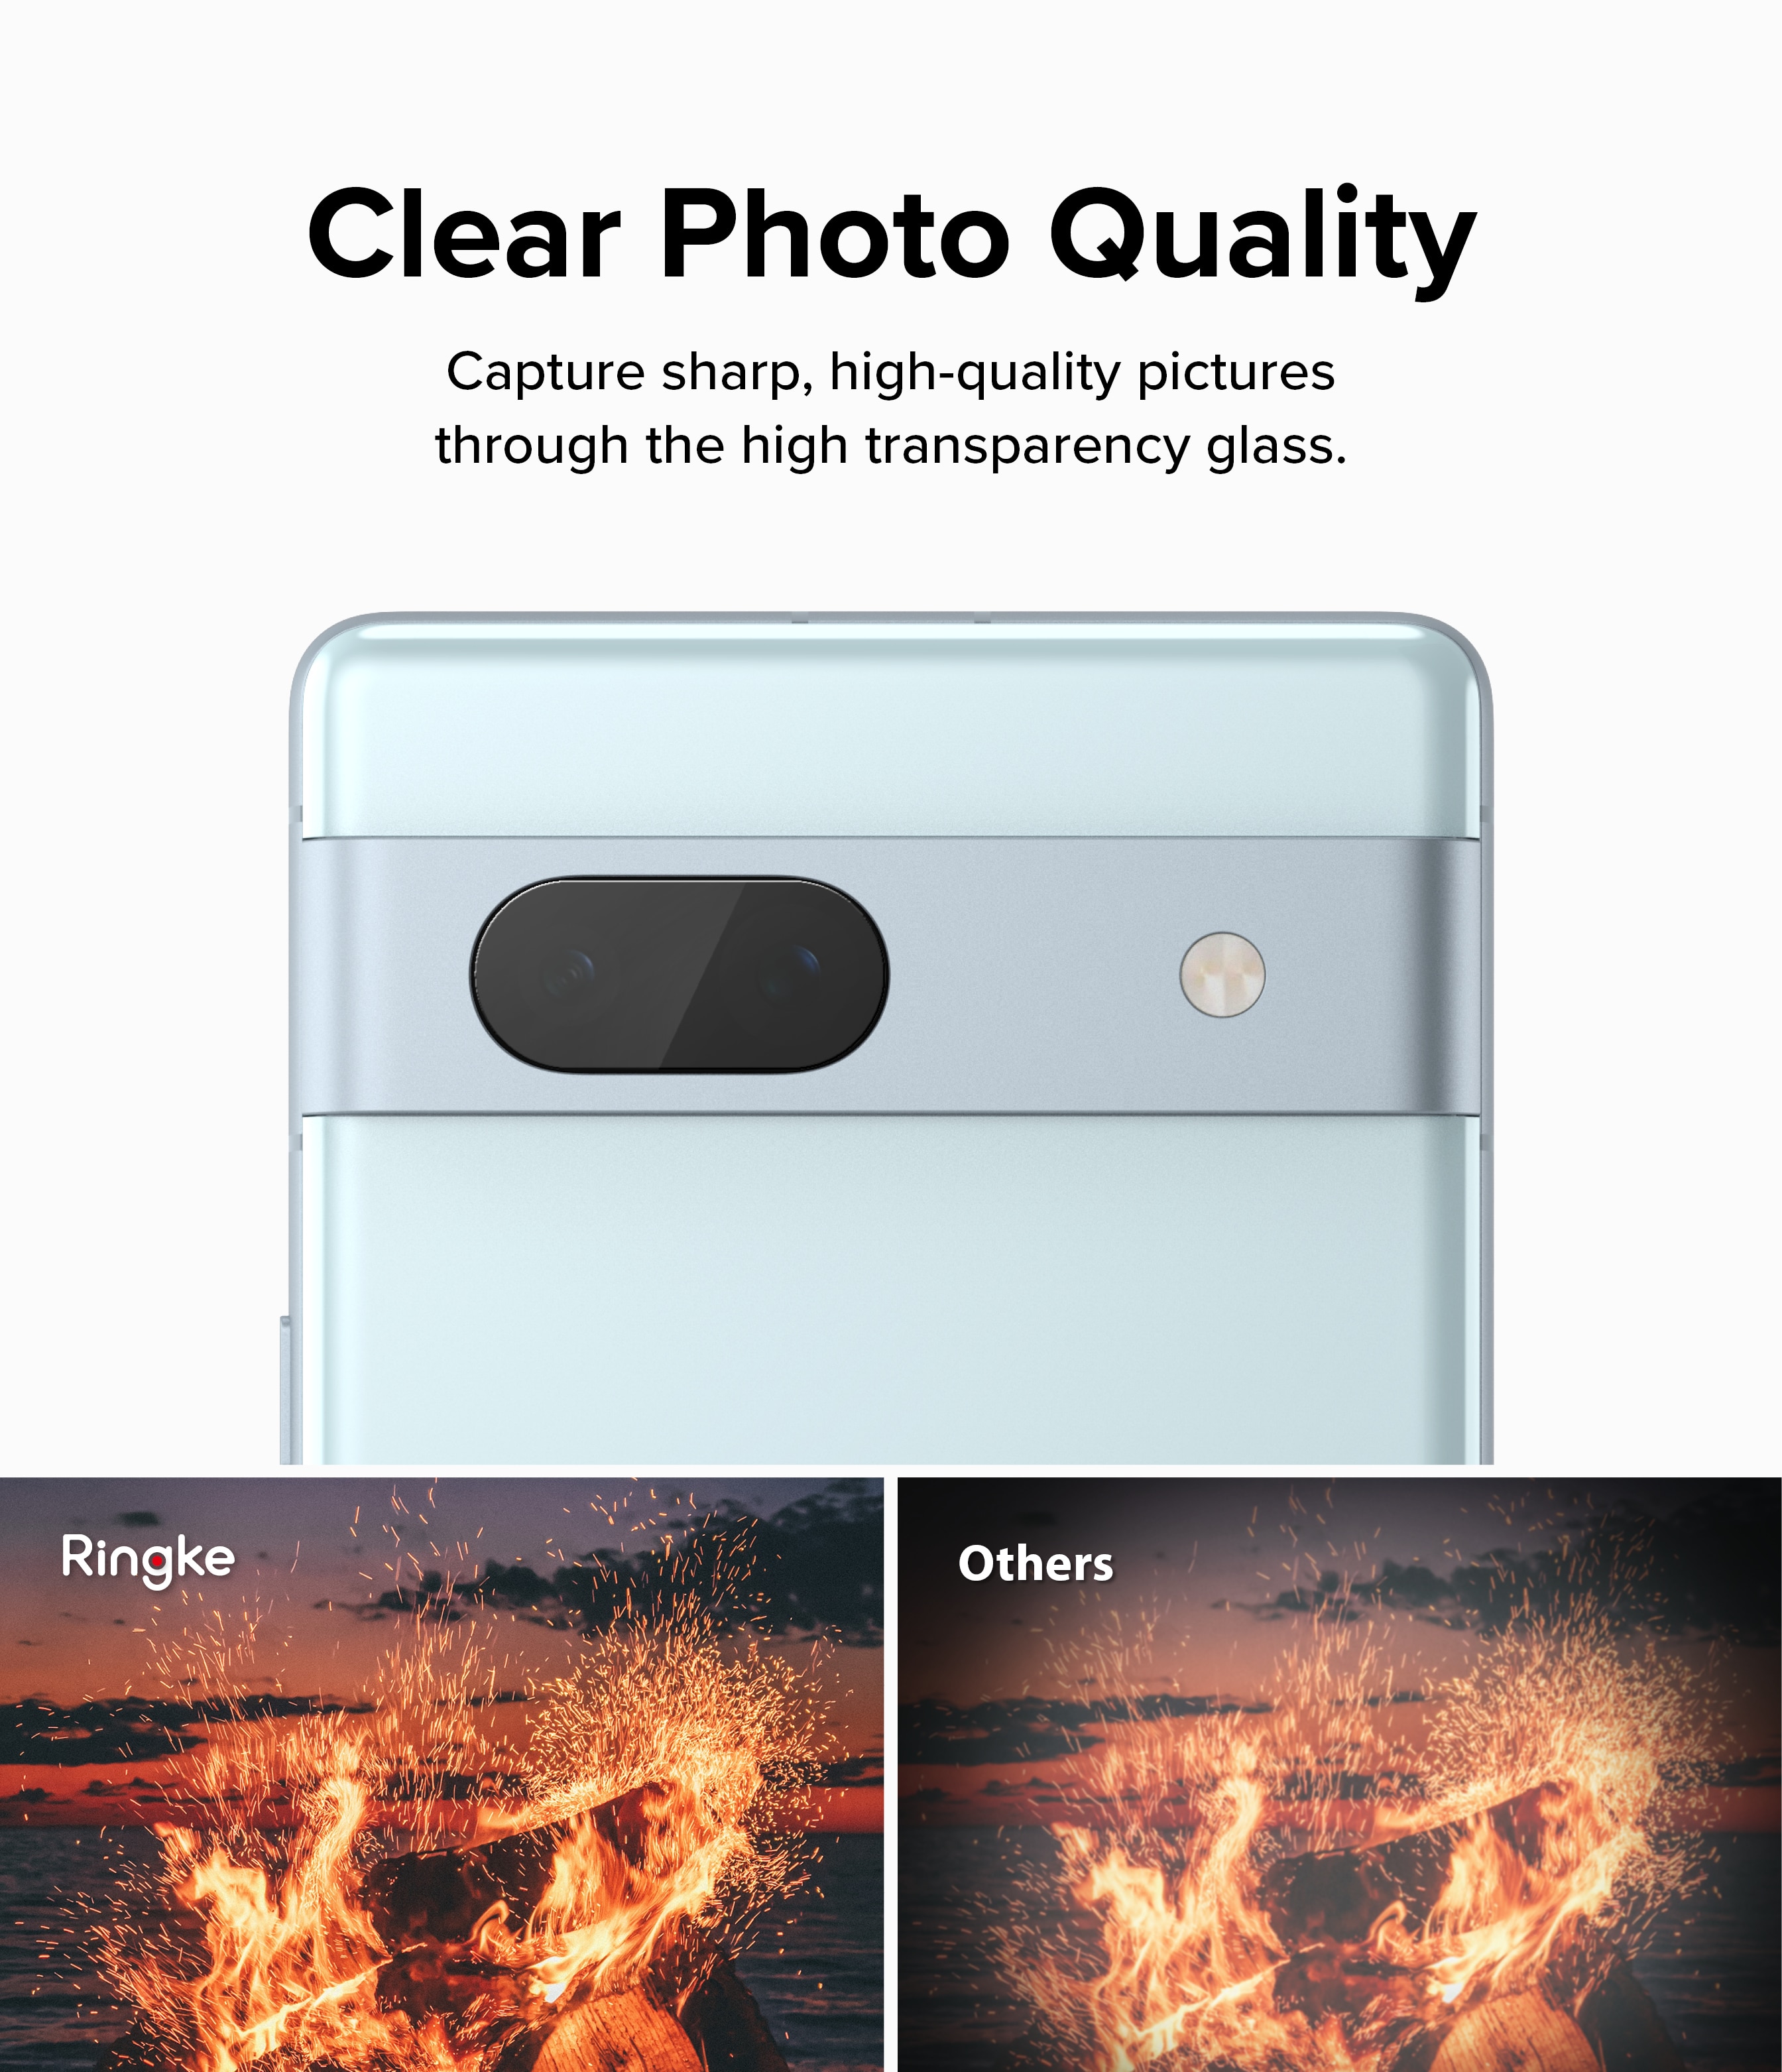 Camera Protector Glass Google Pixel 7a (3-pack)